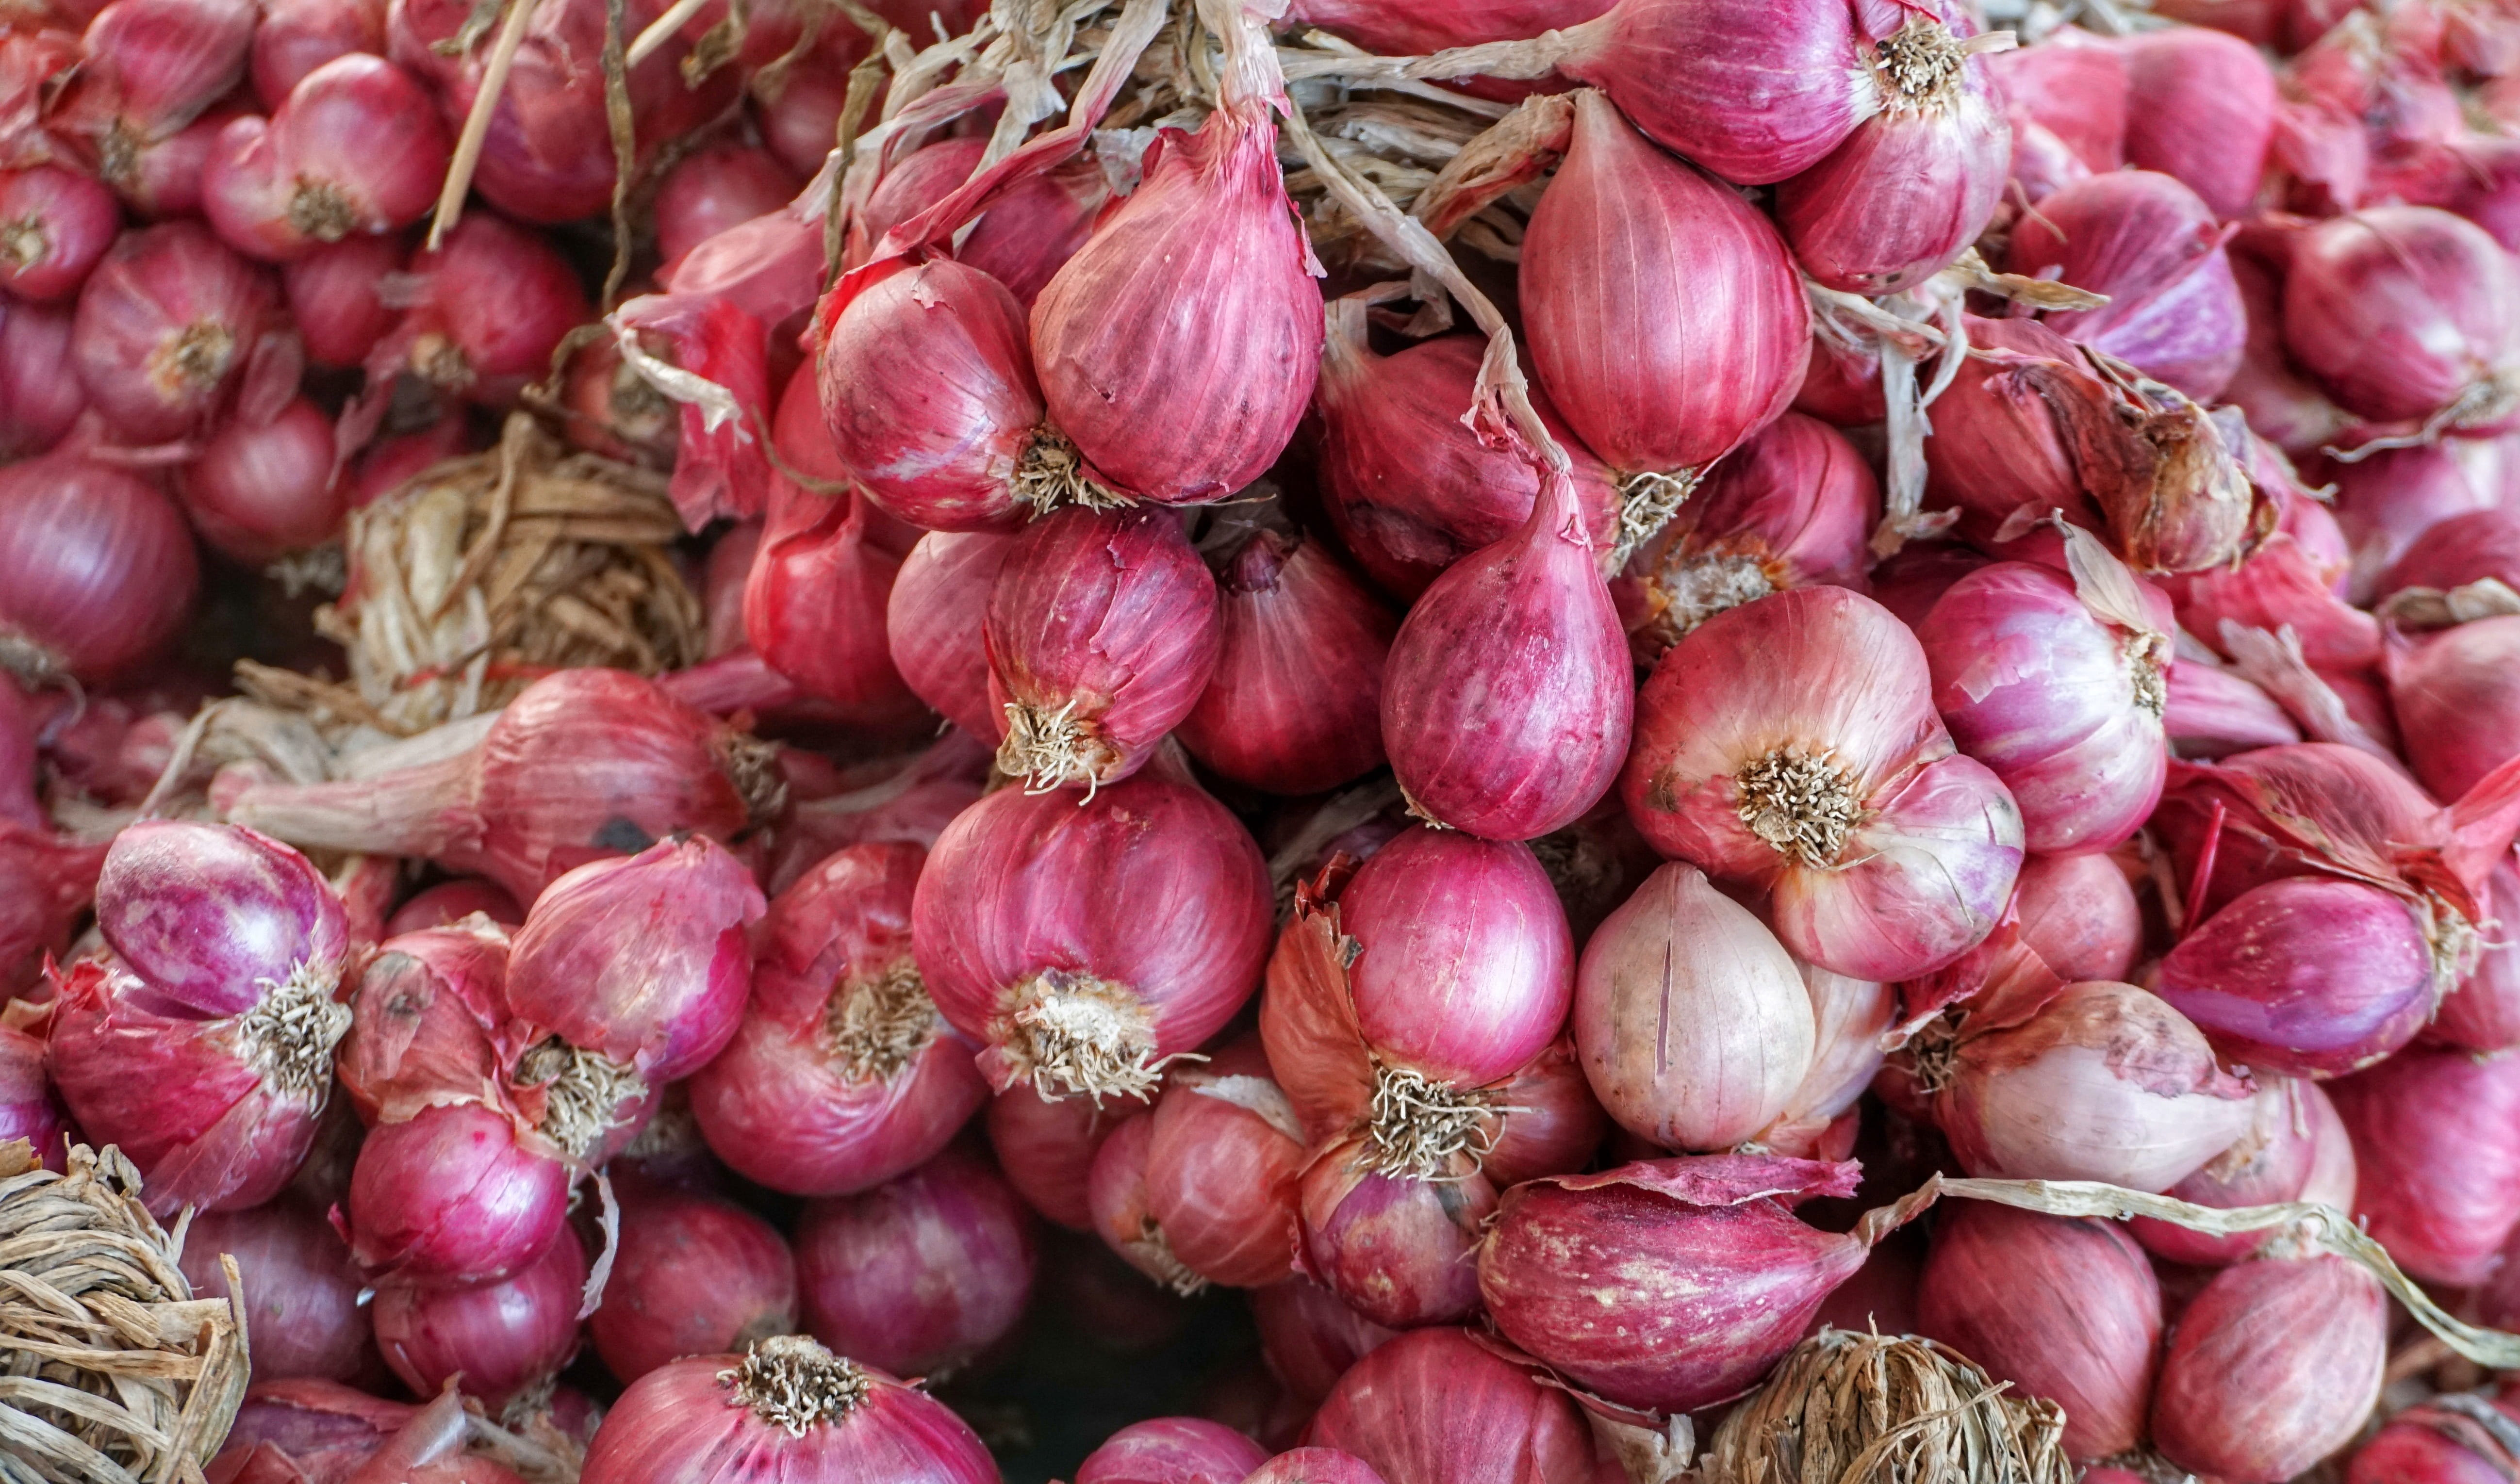 shallot, small, red, onion, bunch, crop, marketplace, food